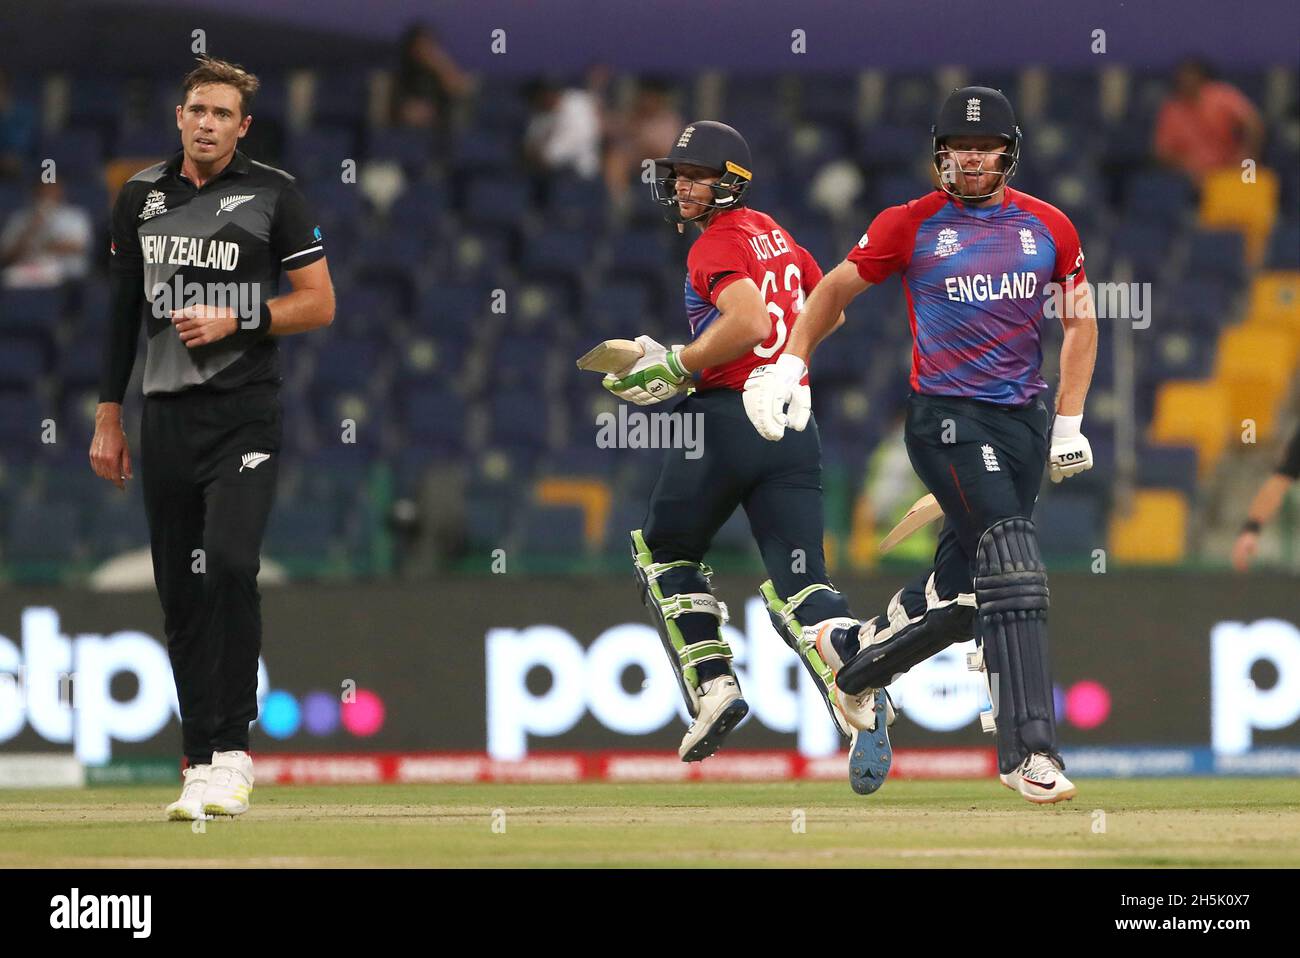 Englands Jos Buttler (centre) and Englands Jonny Bairstow score runs during of the ICC Mens T20 World Cup semi final match held at the Zayed Cricket Stadium, Abu Dhabi